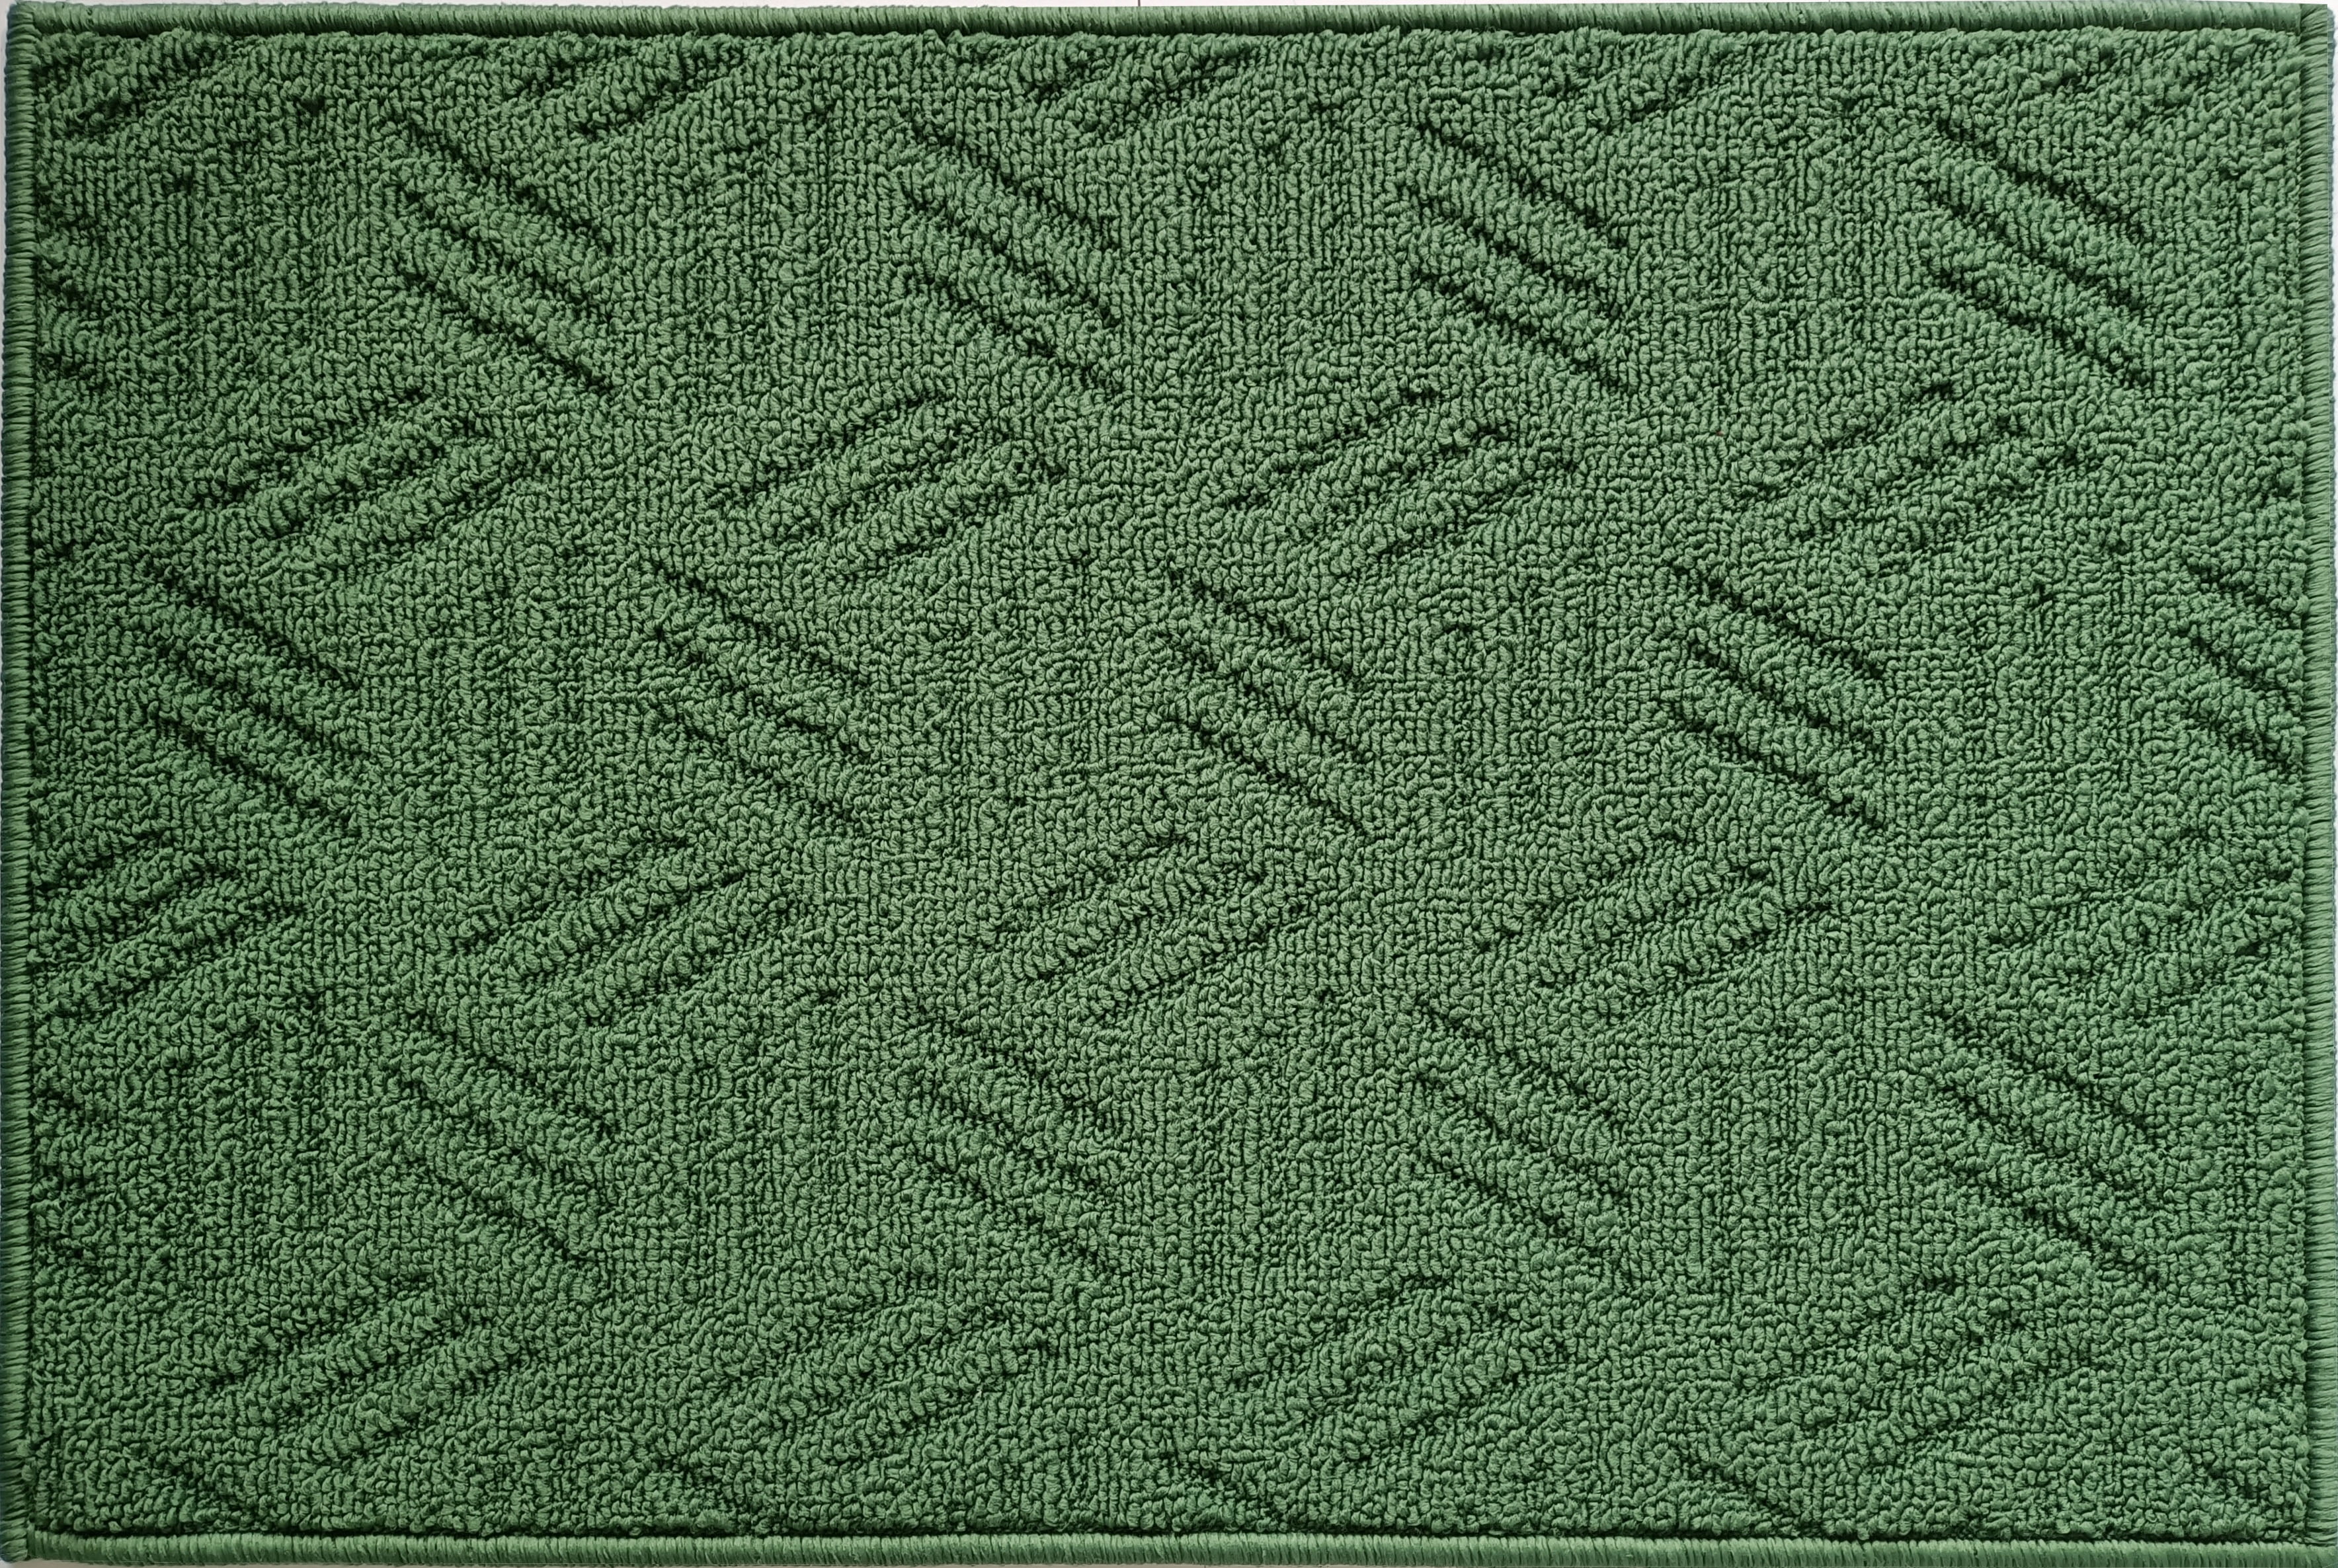 Mainstays Solid High Low Loop Kitchen Mat 18in x 27in Sage Green